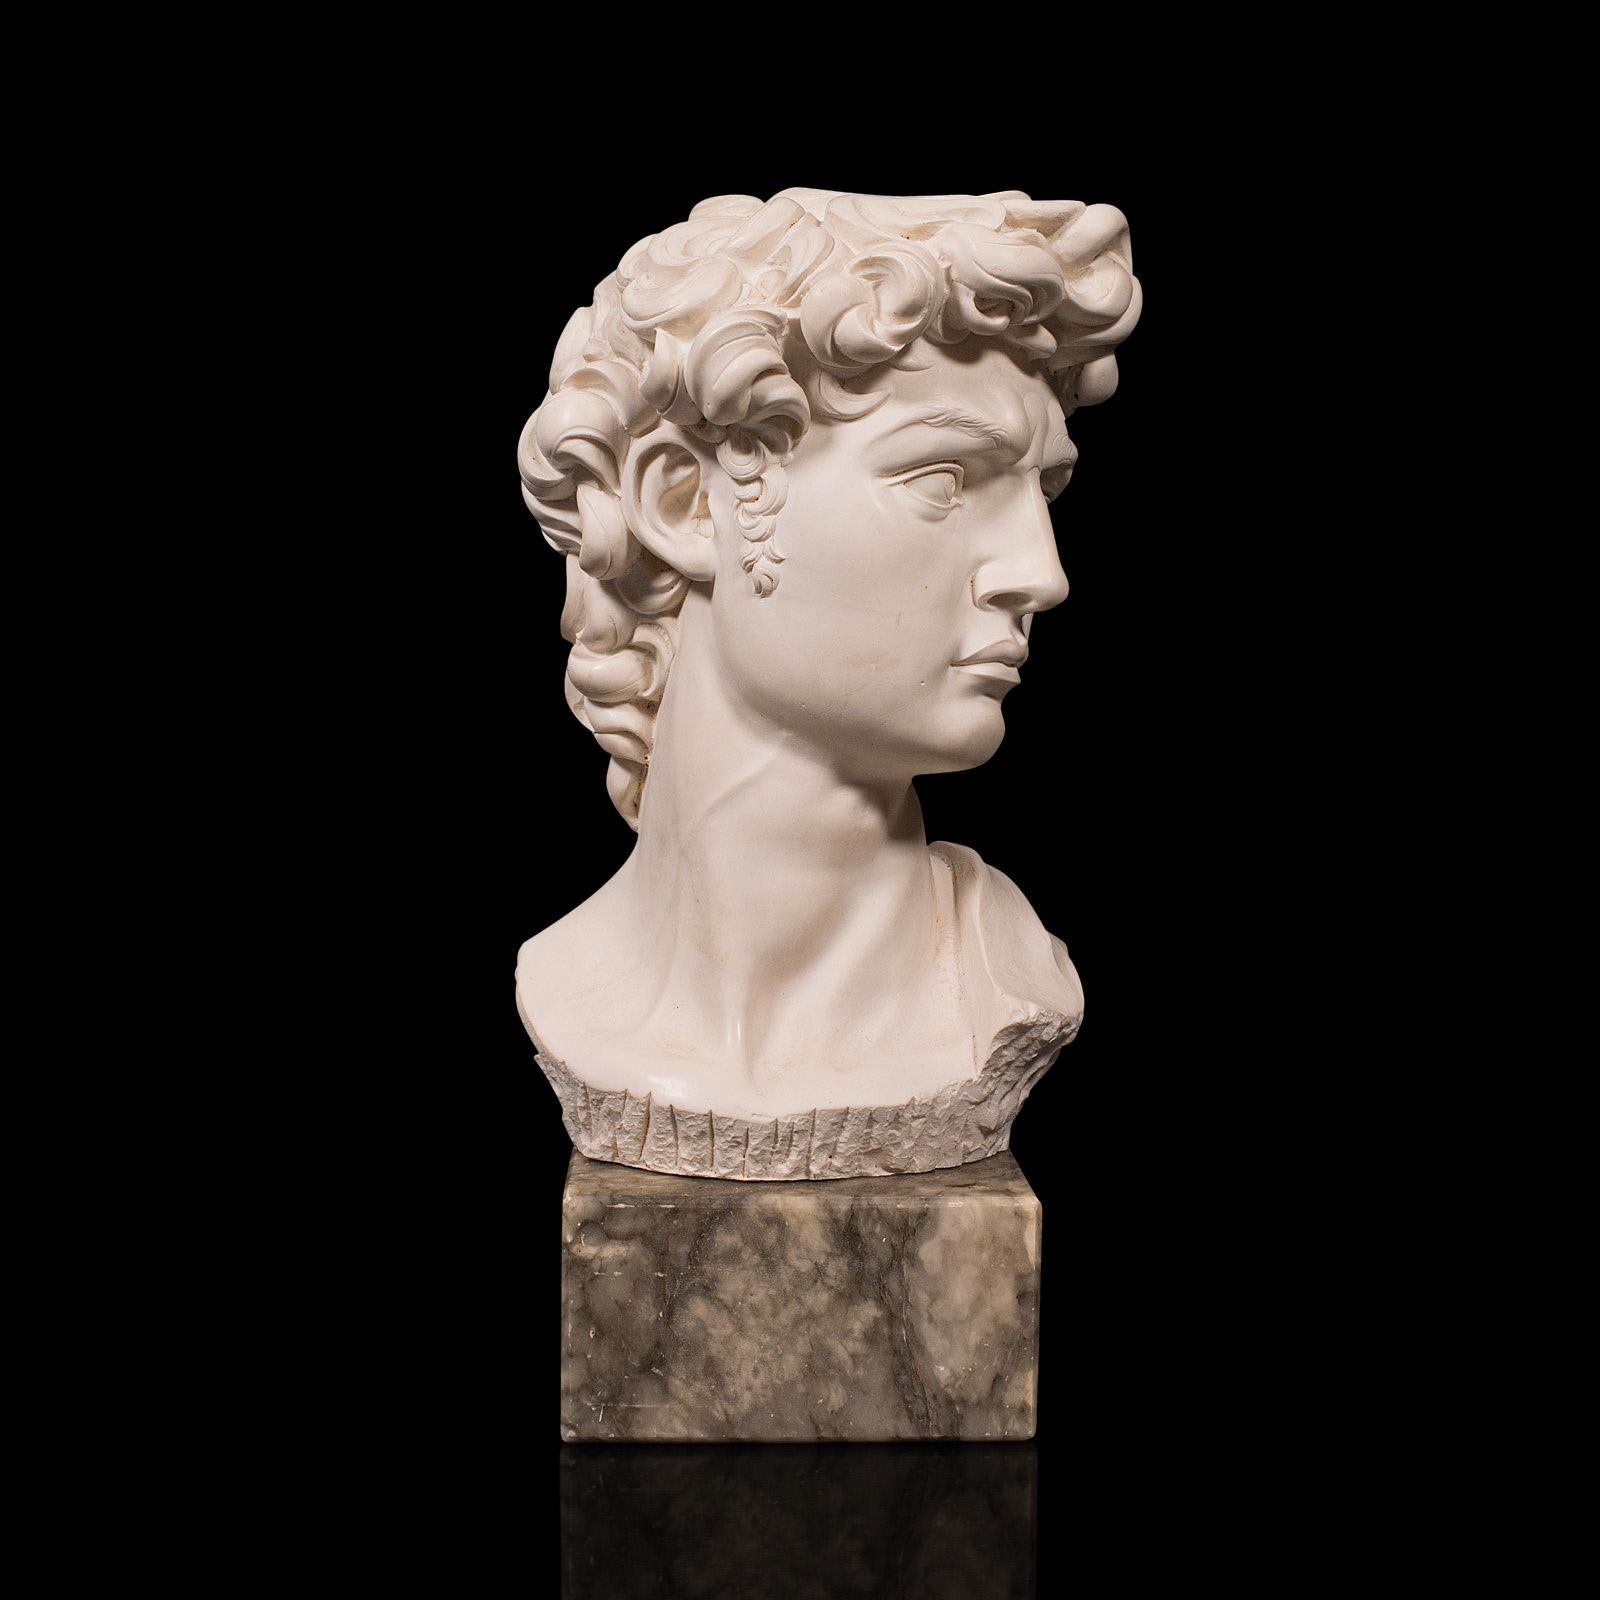 This is a vintage portrait bust. An Italian, composite stone and marble statue of Michelangelo's David, dating to the late 20th century, circa 1980.

Wonderfully expressive bust of Michelangelo's famous David statue
Displays a desirable aged